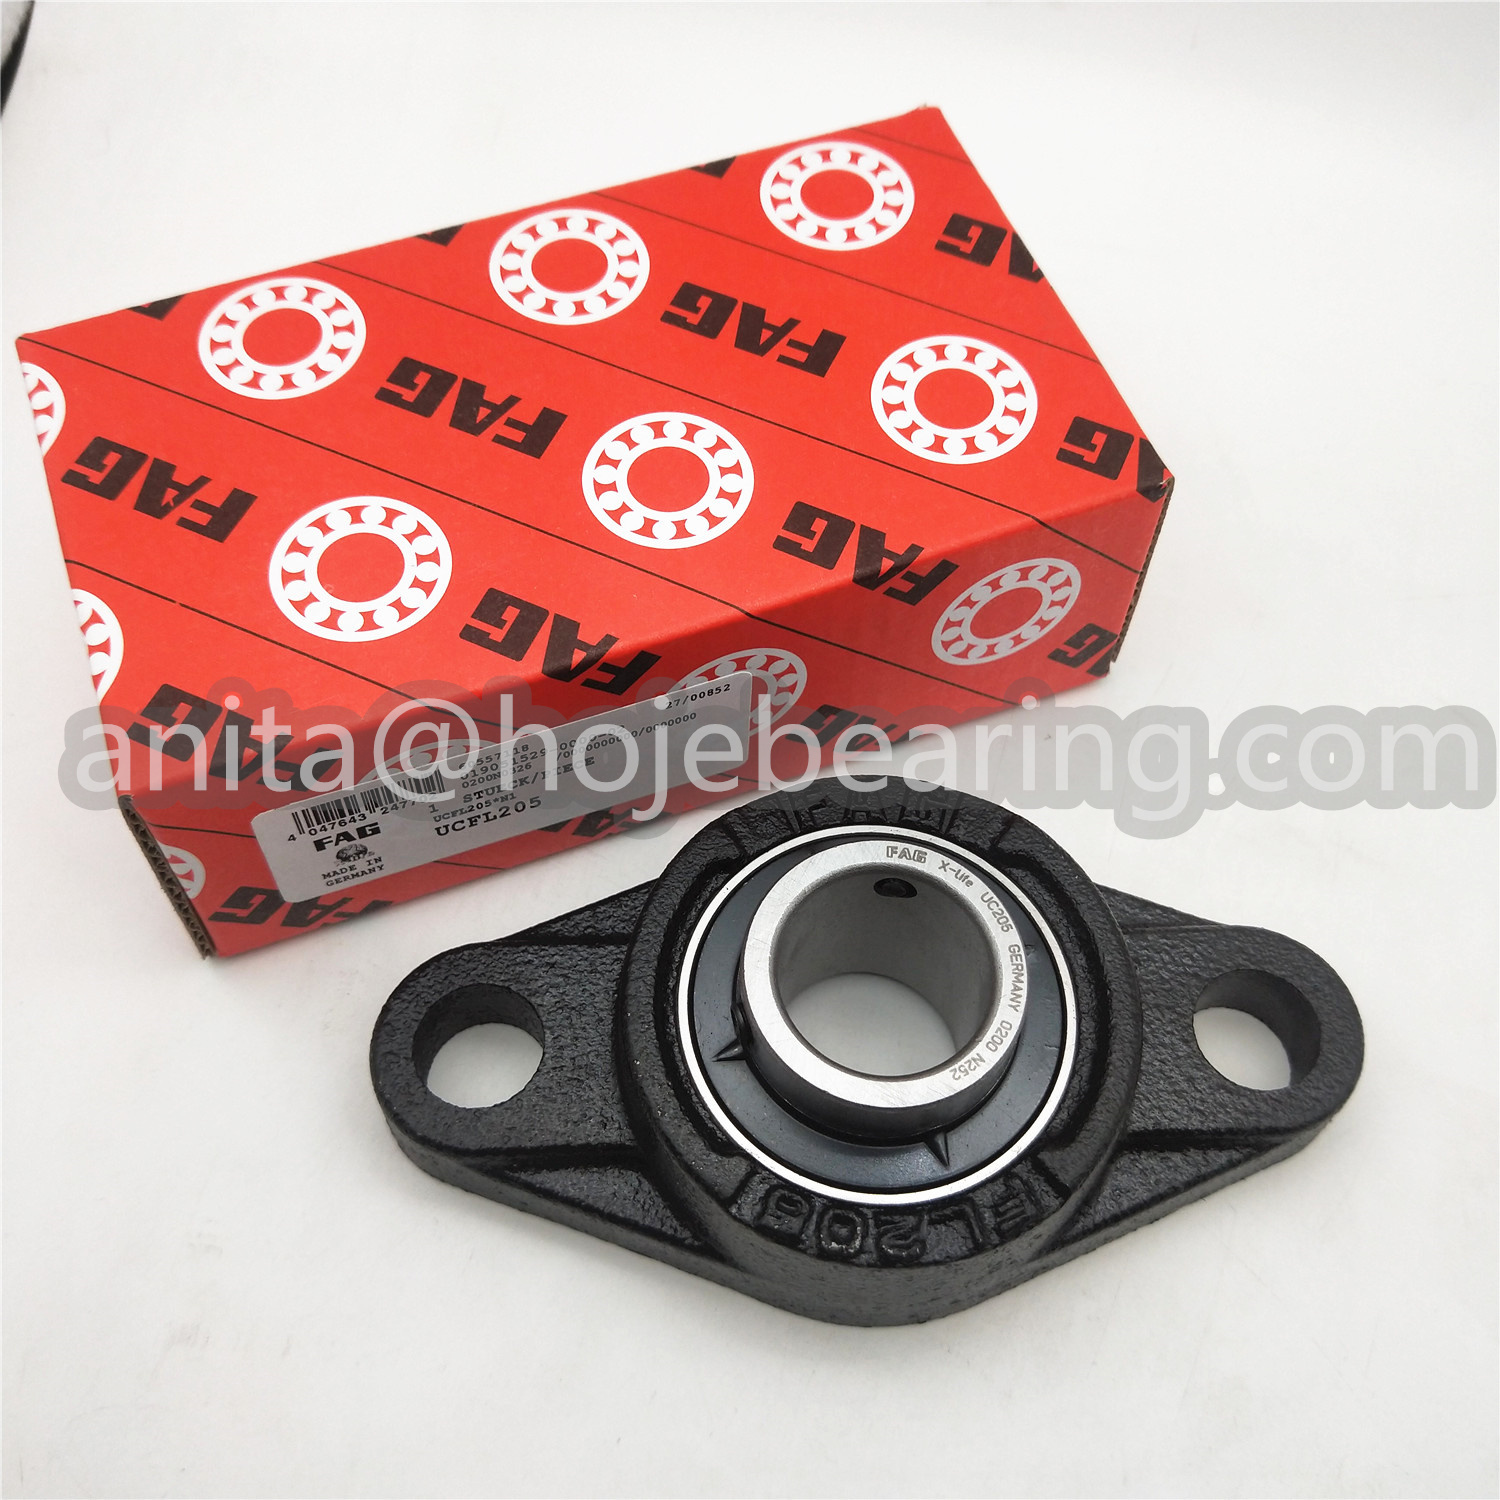 FAG UCFL 205, Cast Iron Housing Oval flanged for Insert Bearing